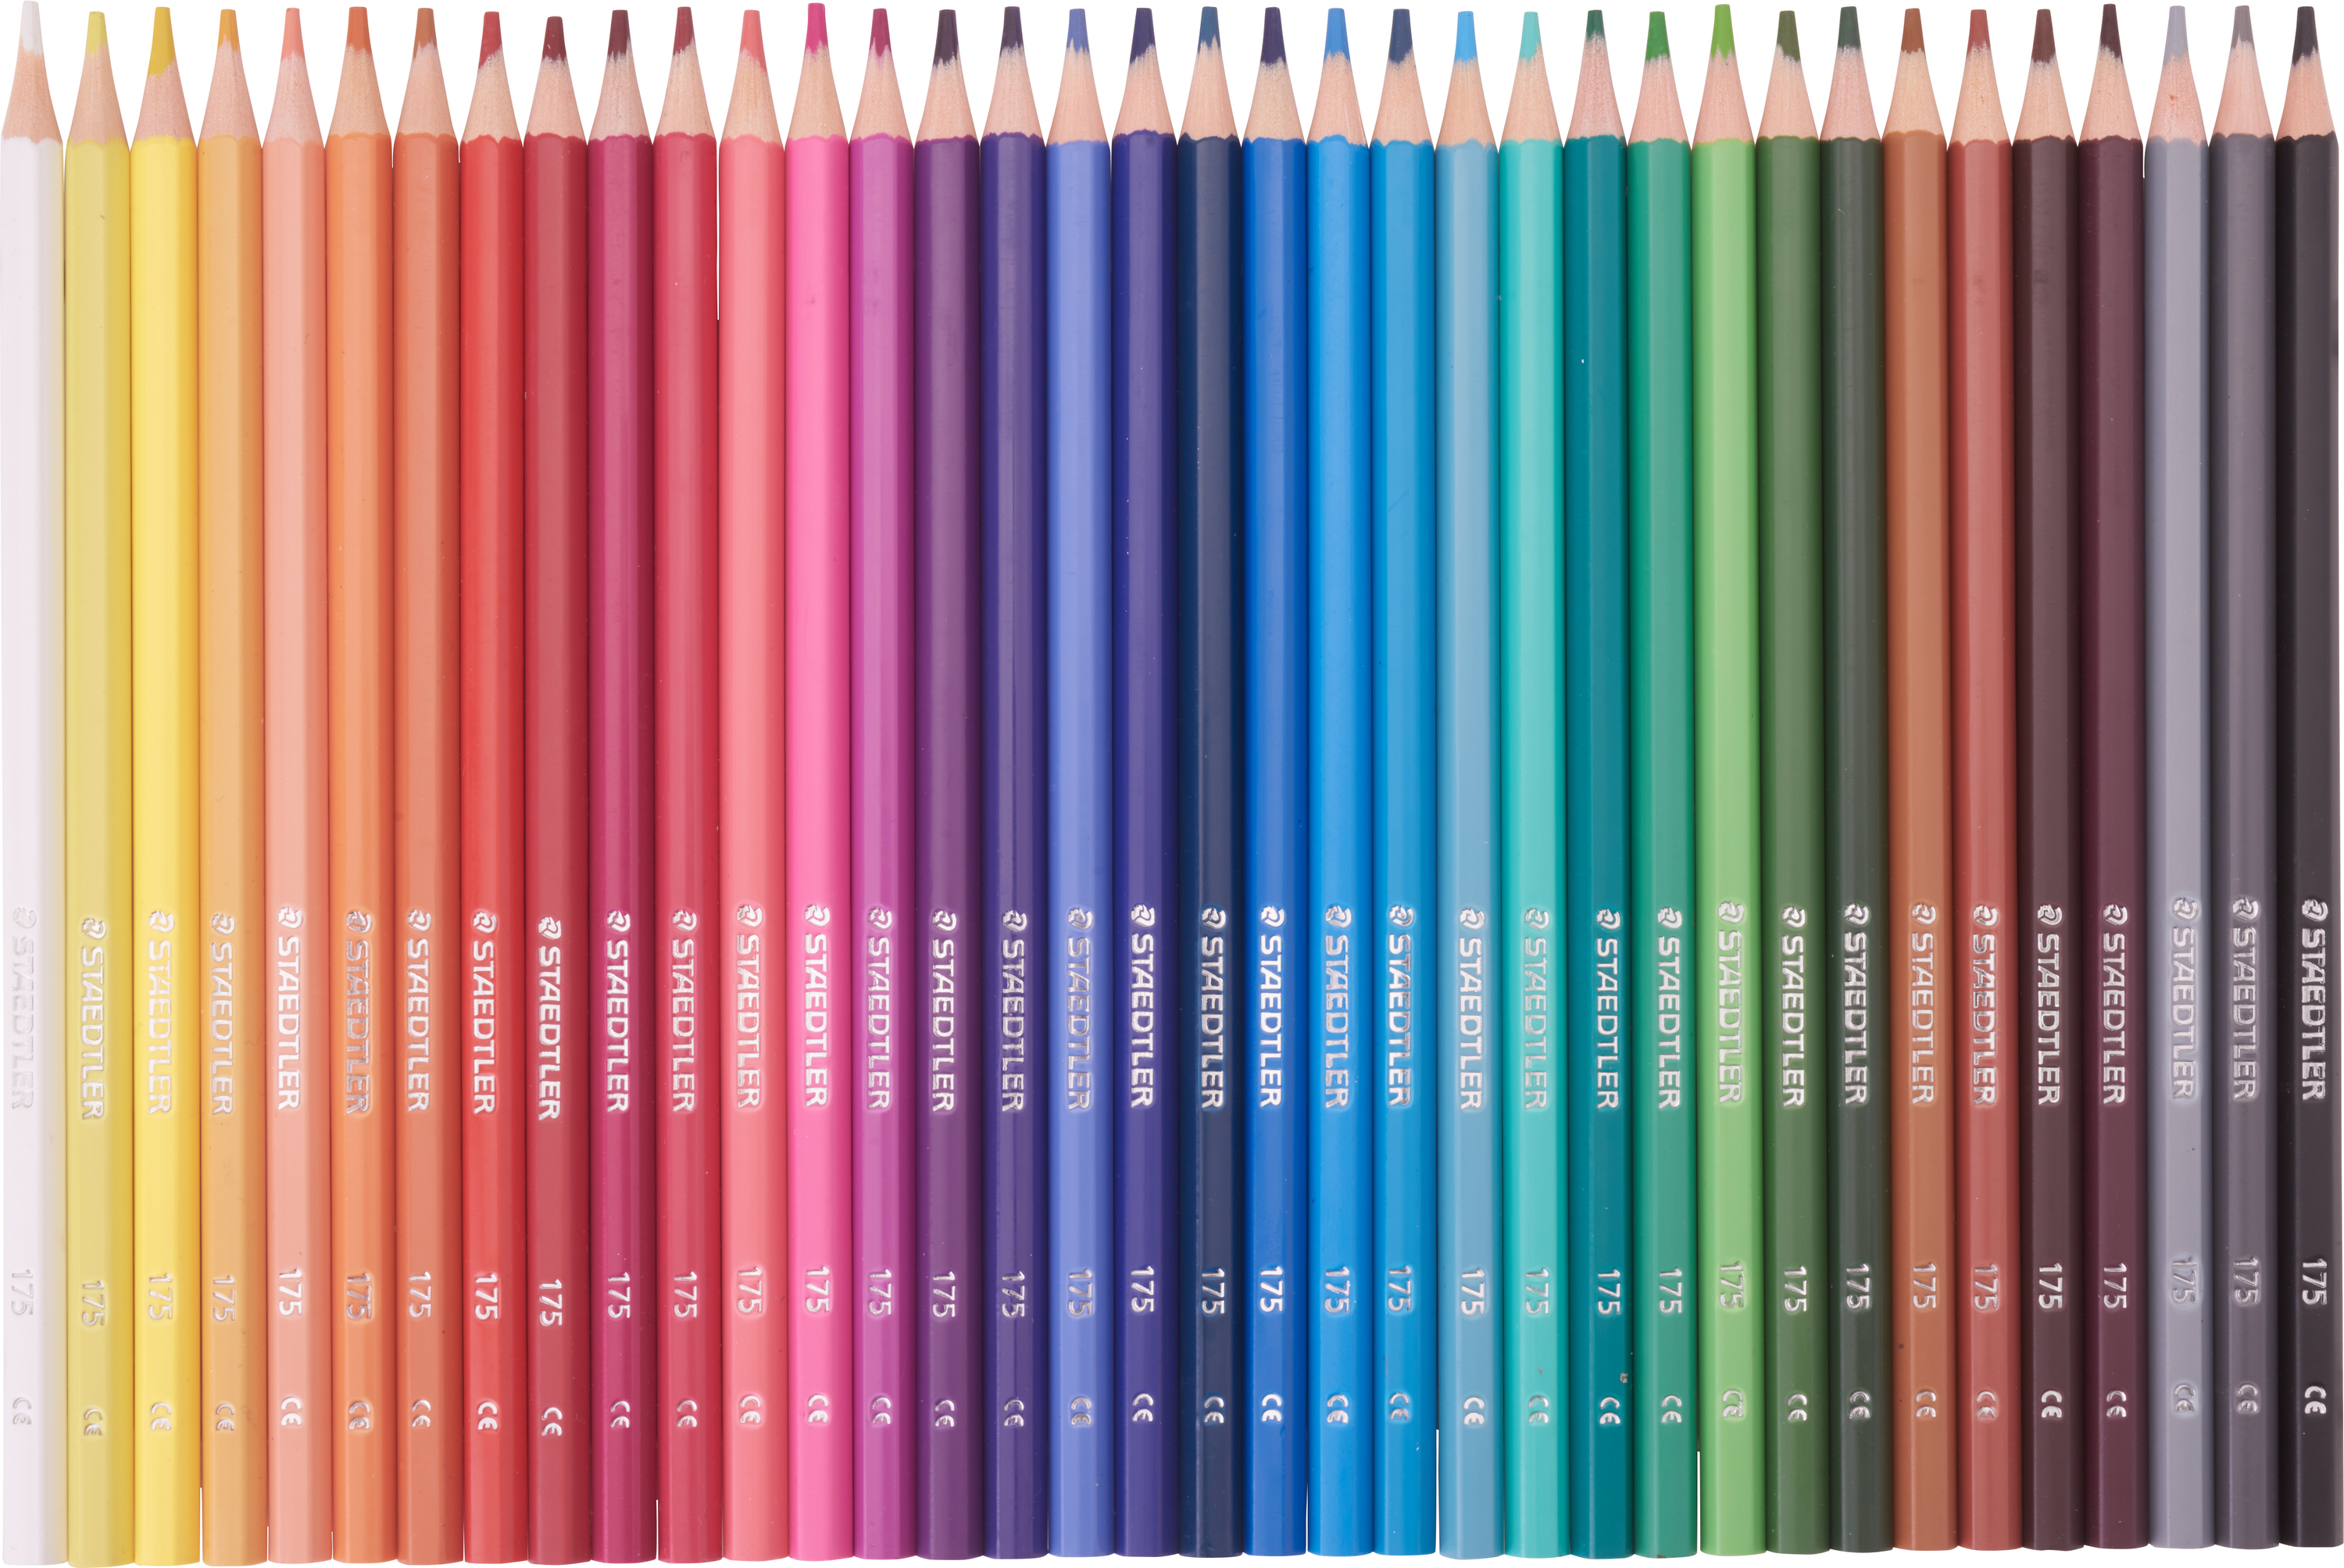 STAEDTLER 175 Wood-Free Coloured Pencils - Assorted Colours (Tin of 36)